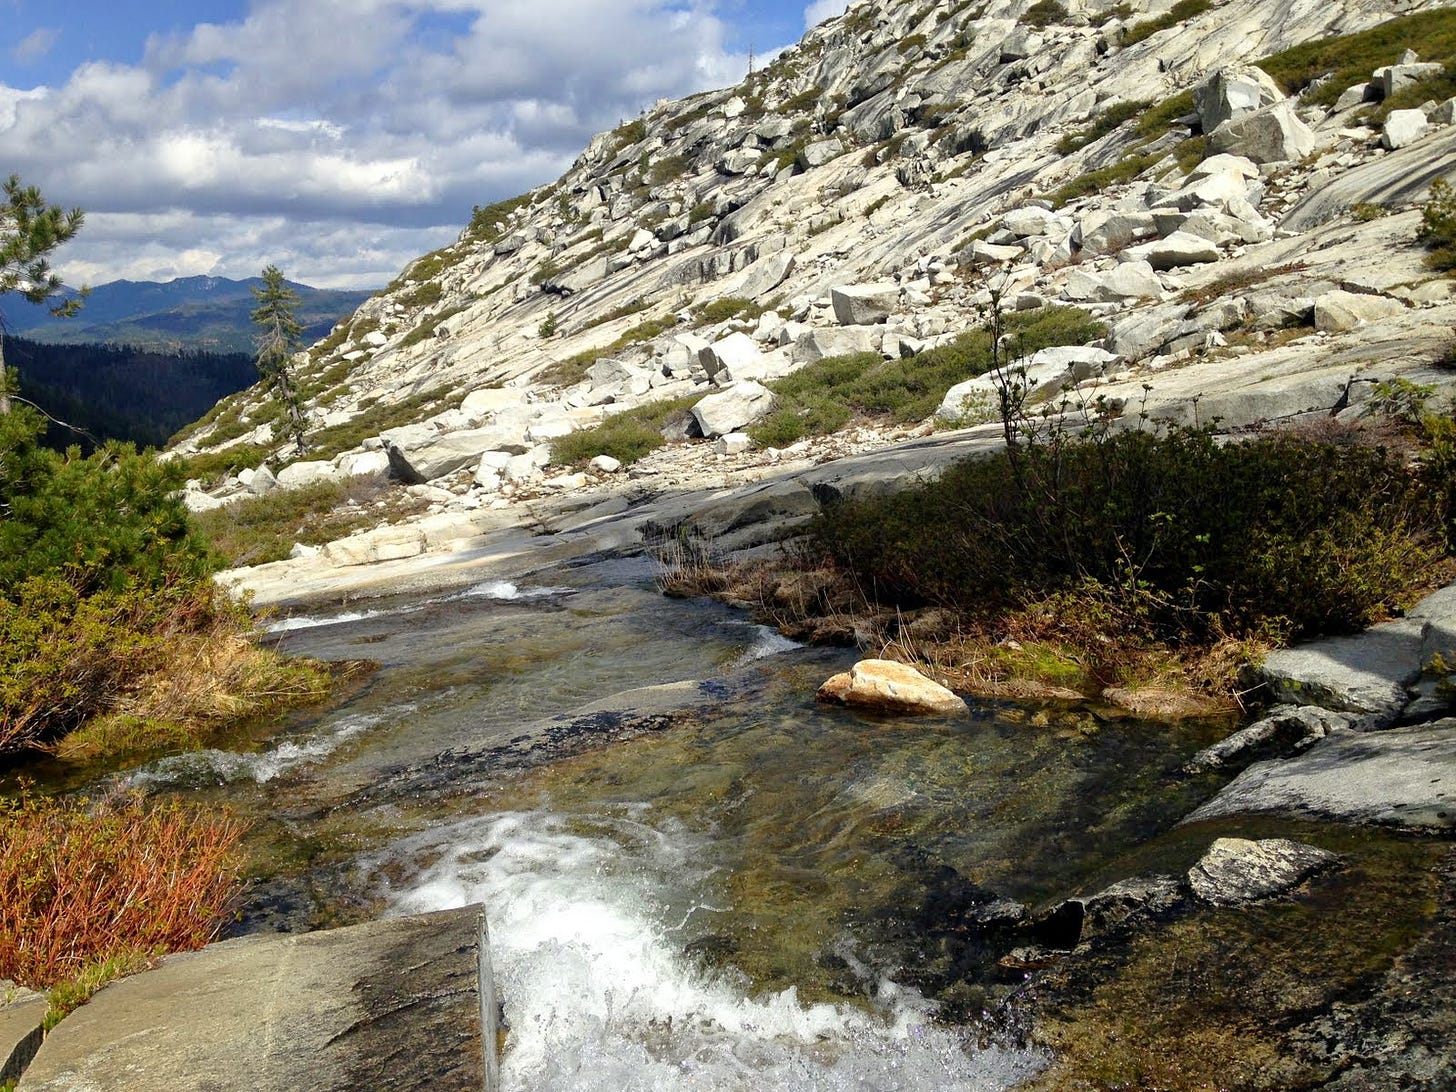 A shallow stream runs down the side of a mountain composed of blocky white rocks with mountains and evergreen trees off into the distance.